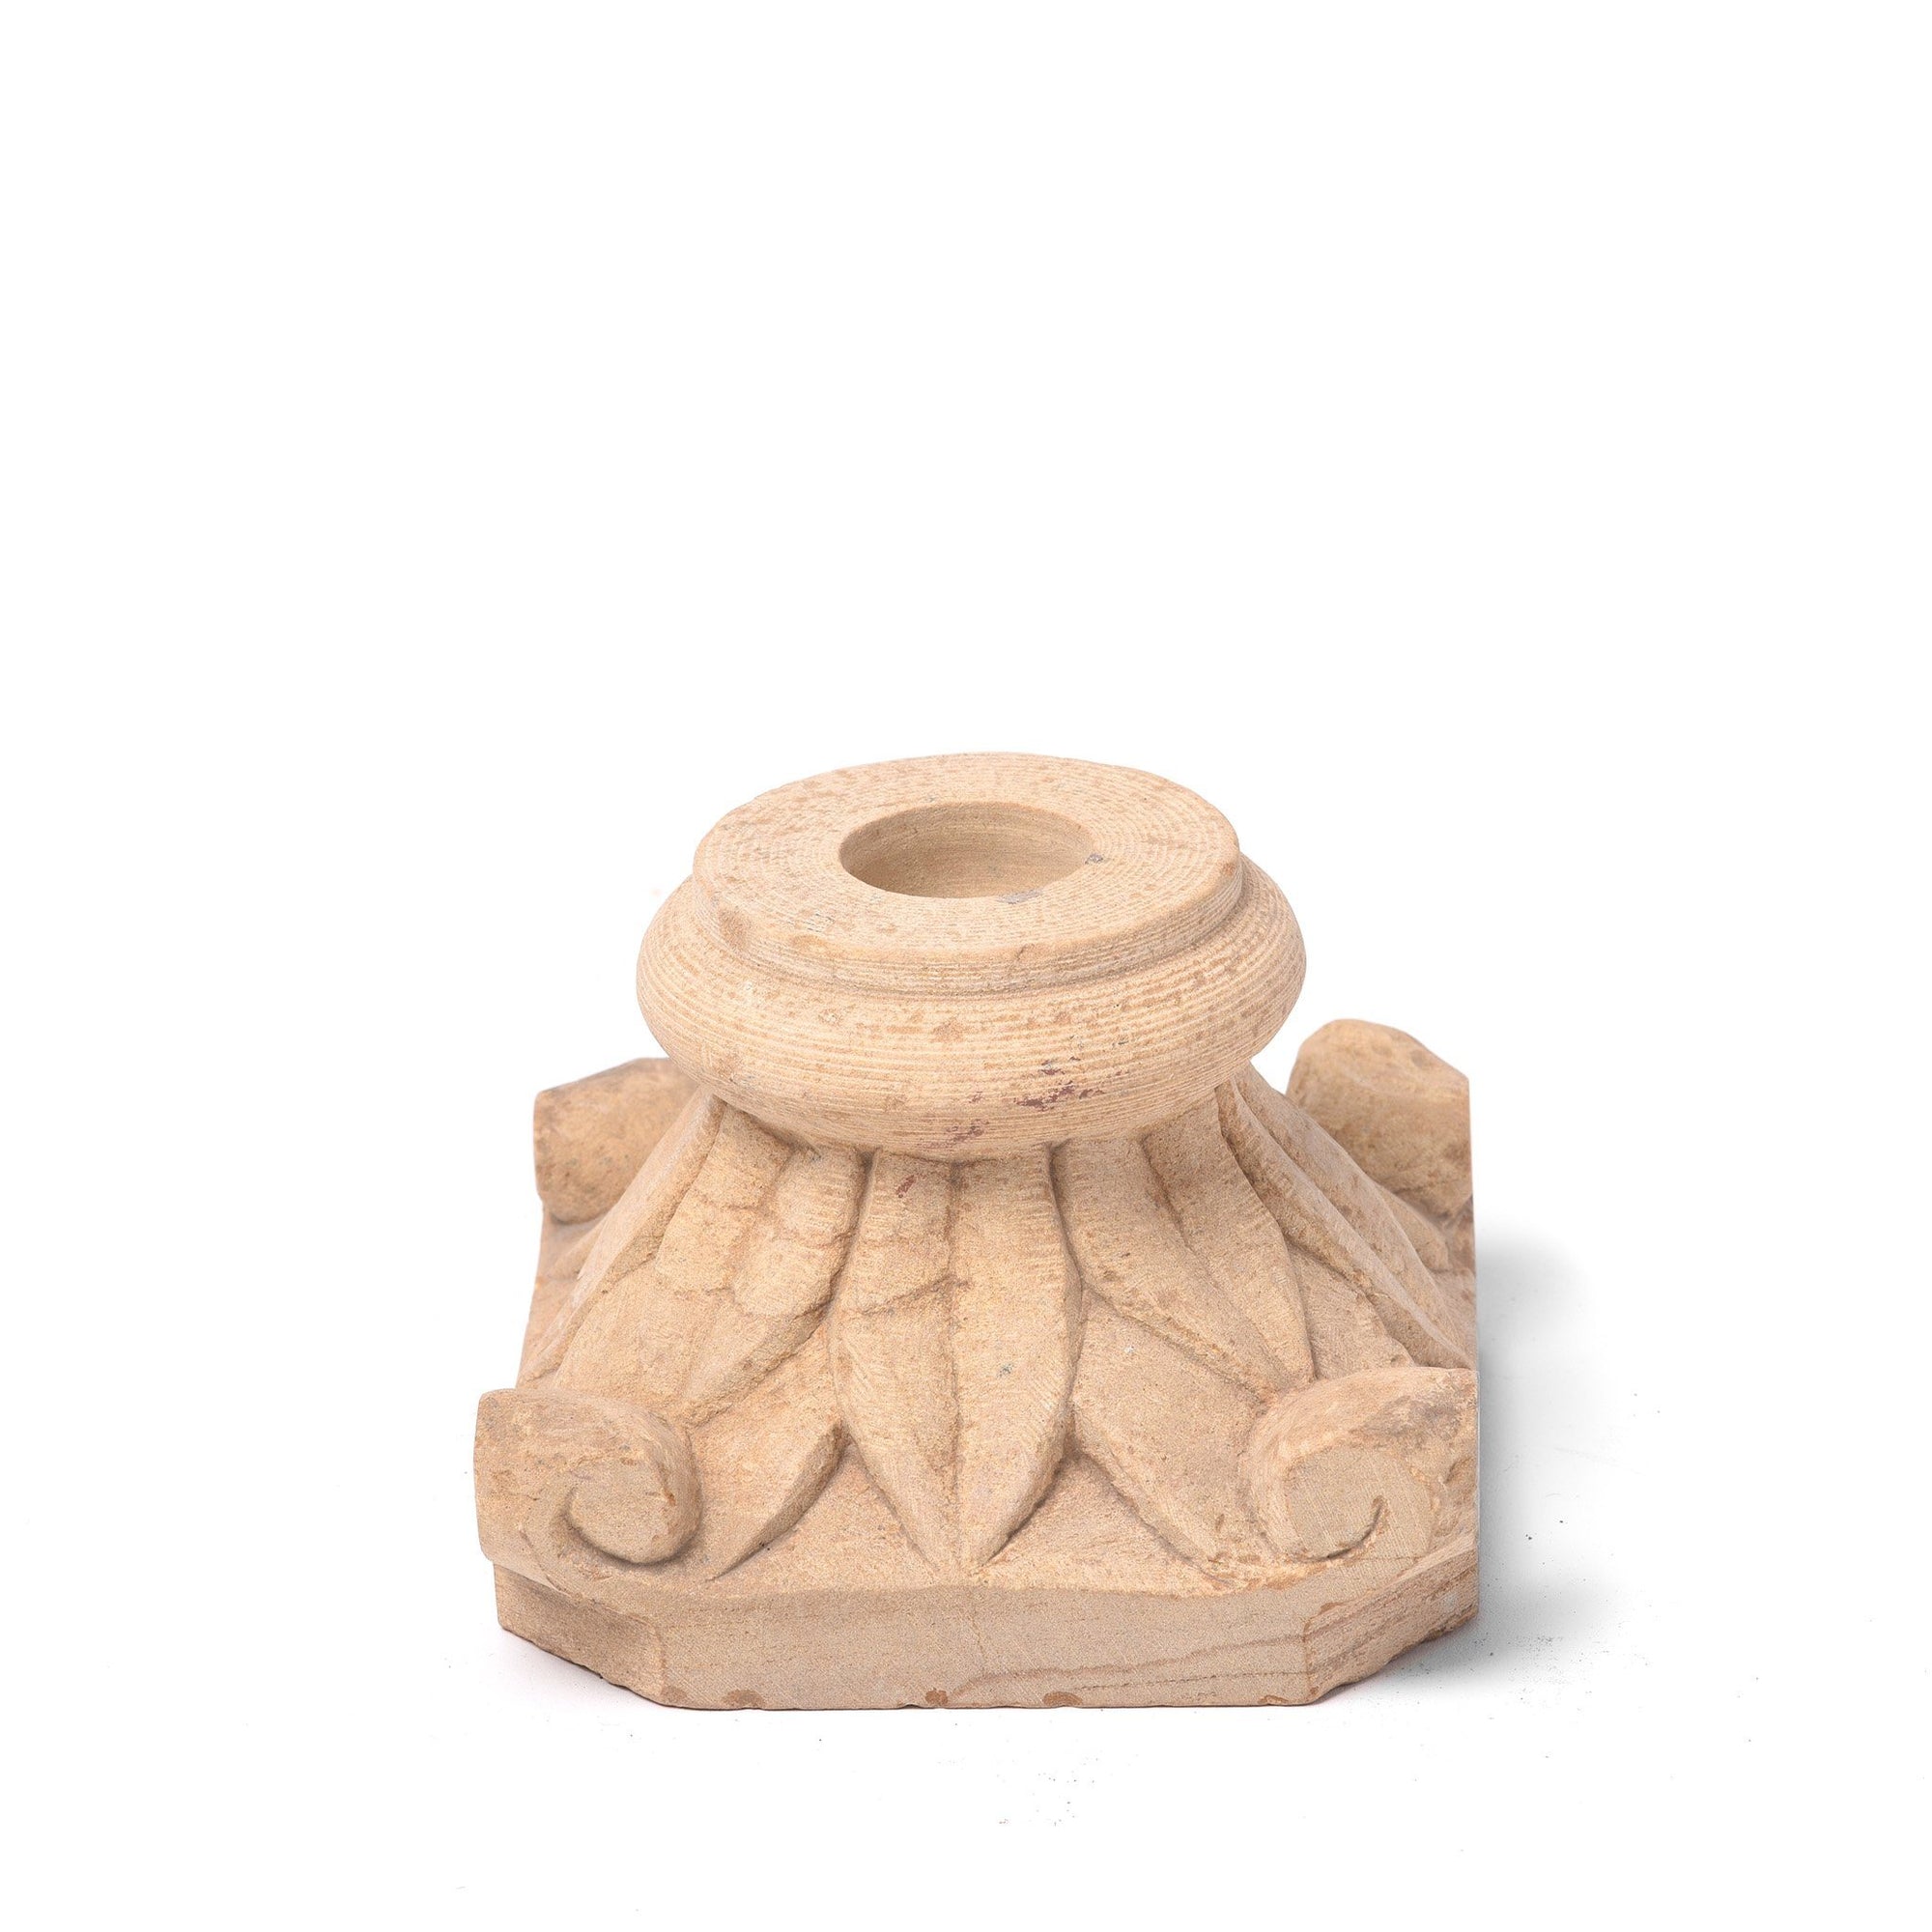 Stone Candle Stand From Jaisalmer | Indigo Antiques